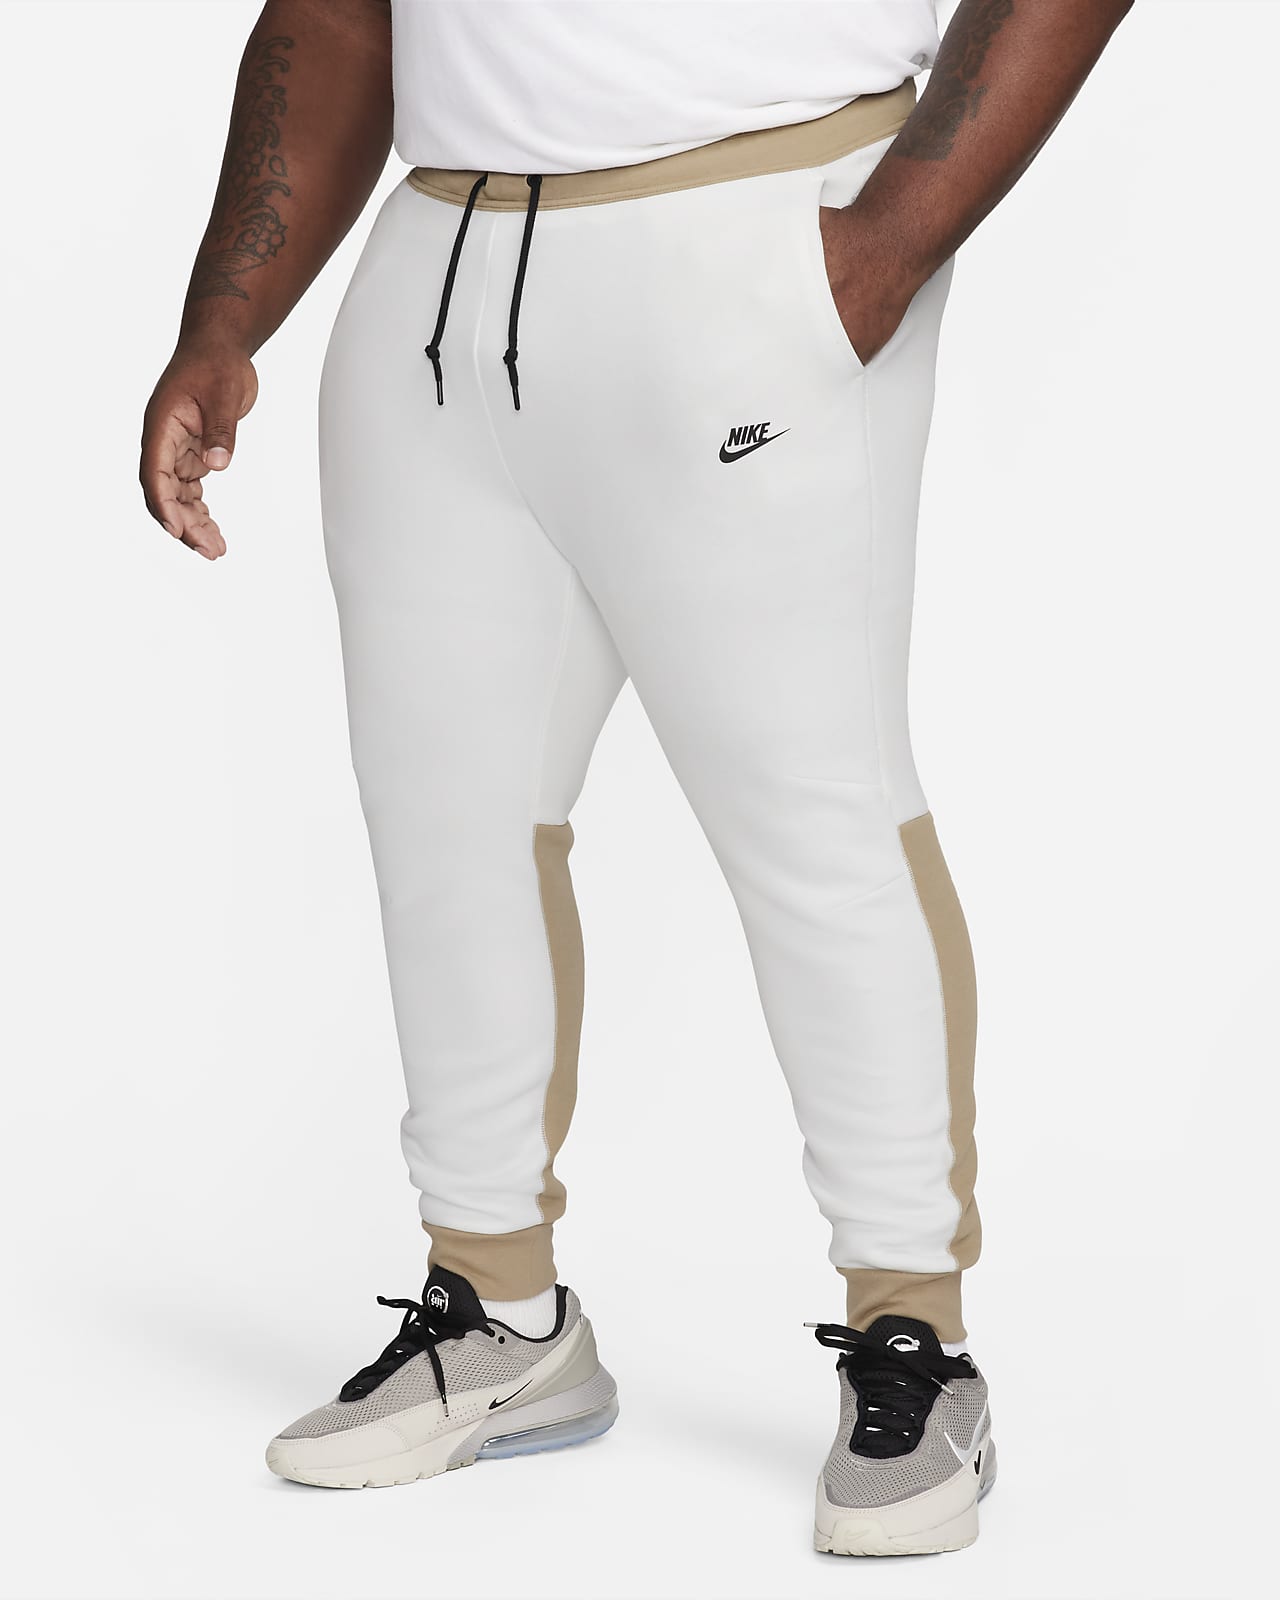 https://static.nike.com/a/images/t_PDP_1280_v1/f_auto,q_auto:eco/ebb98dff-2adc-4022-8970-677bbbbb7192/sportswear-tech-fleece-mens-joggers-cFcM1w.png